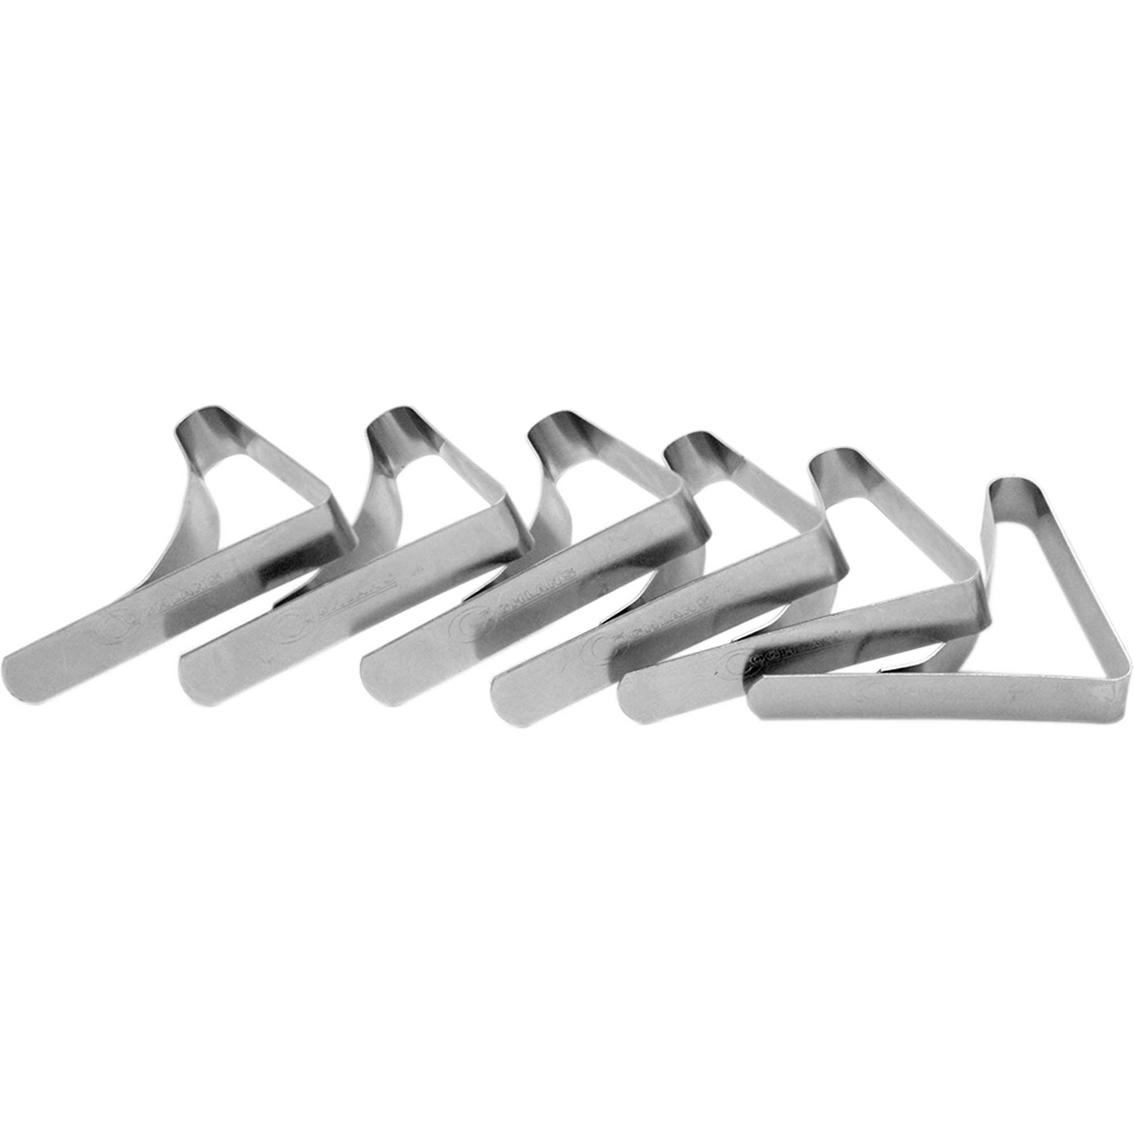 Coghlans Tablecloth Clamps 6 pk. - Image 2 of 2